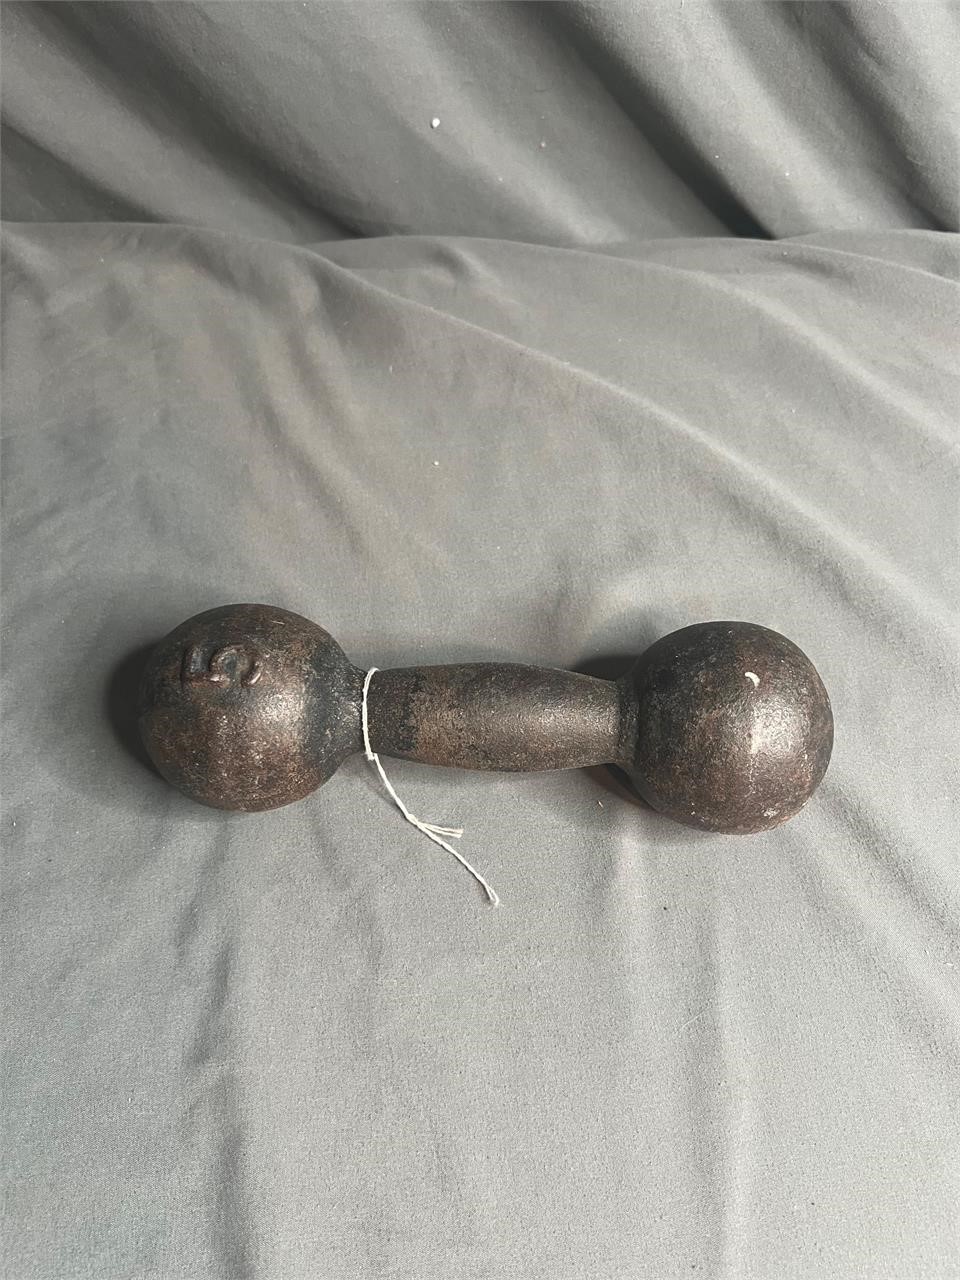 Vintage 5 Lb Dumbbell Weight